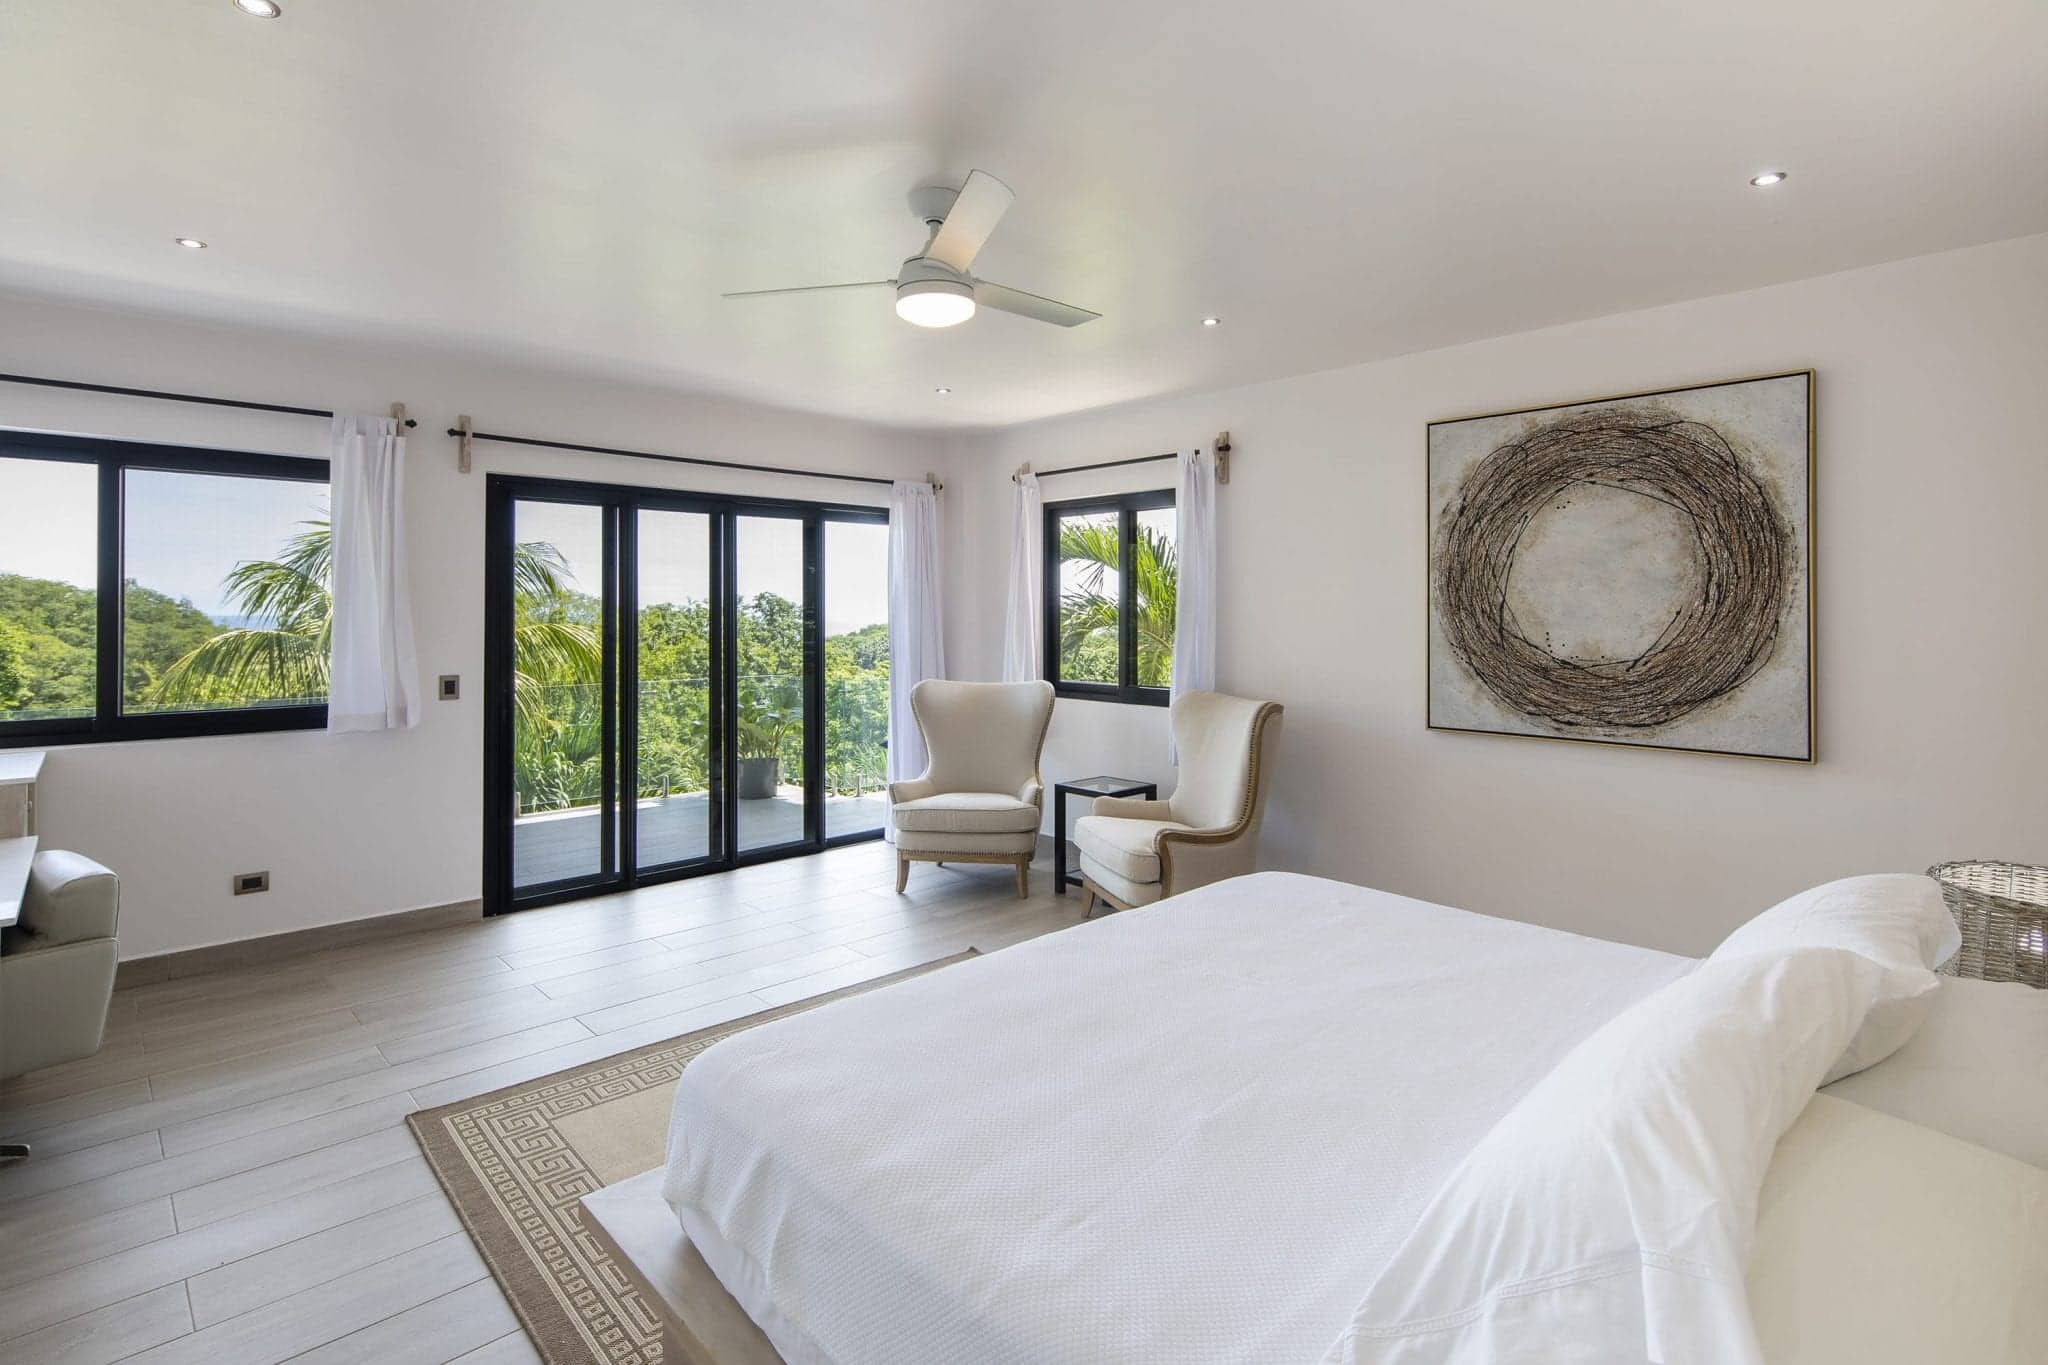 One of the guest rooms available at Bodhi Tree Yoga Resort in Costa Rica with beautiful white decor.